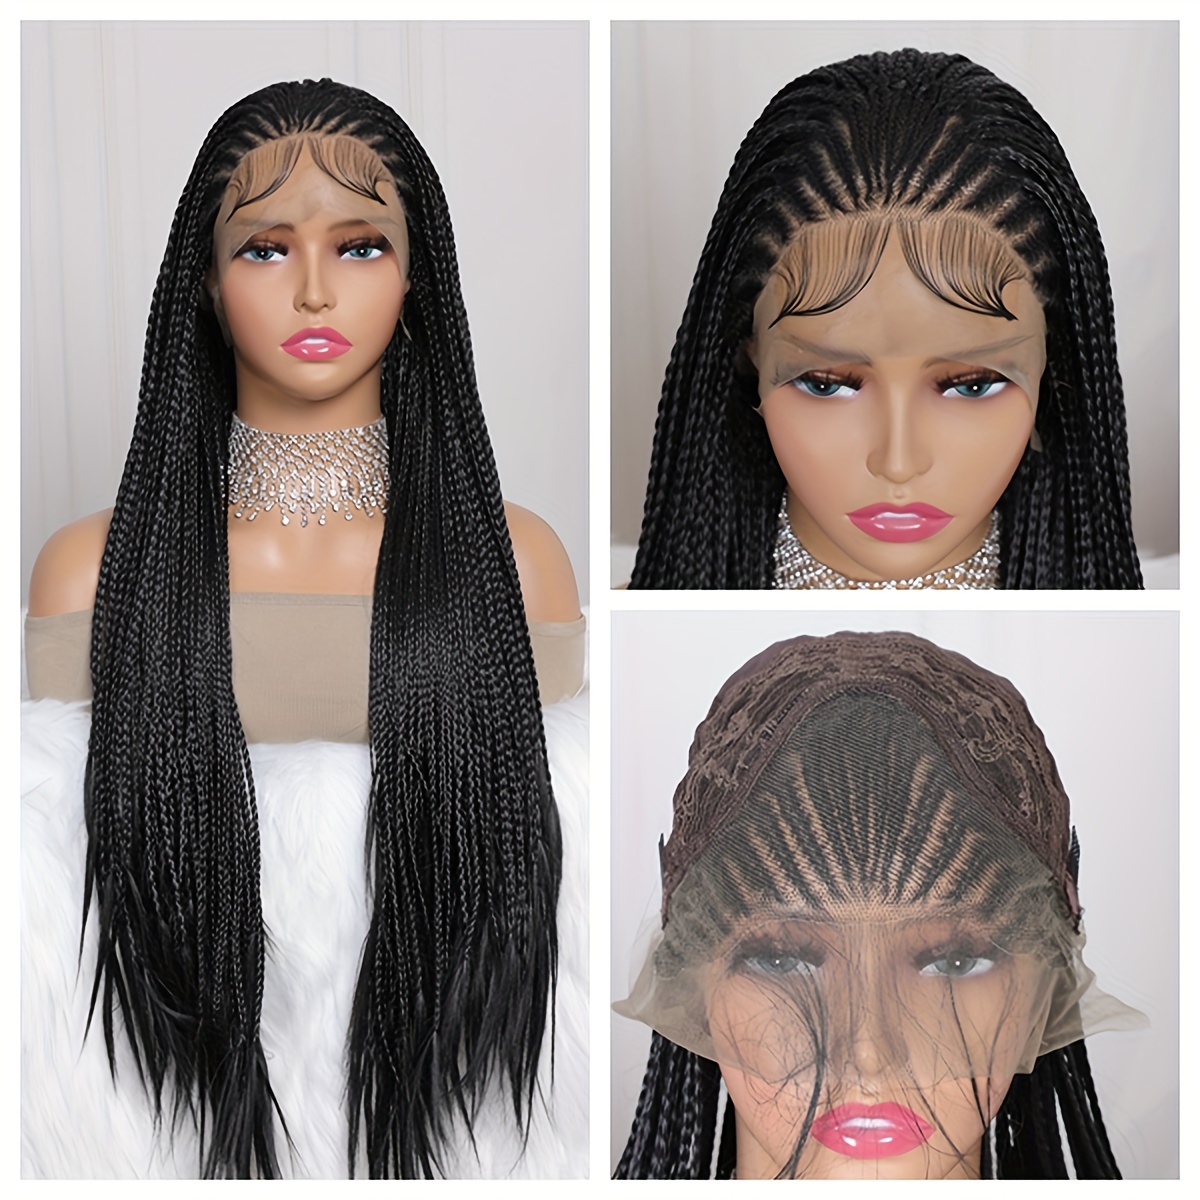 28 Inches 13x4 Braided Wigs Synthetic Lace Front Wig Updo Braided